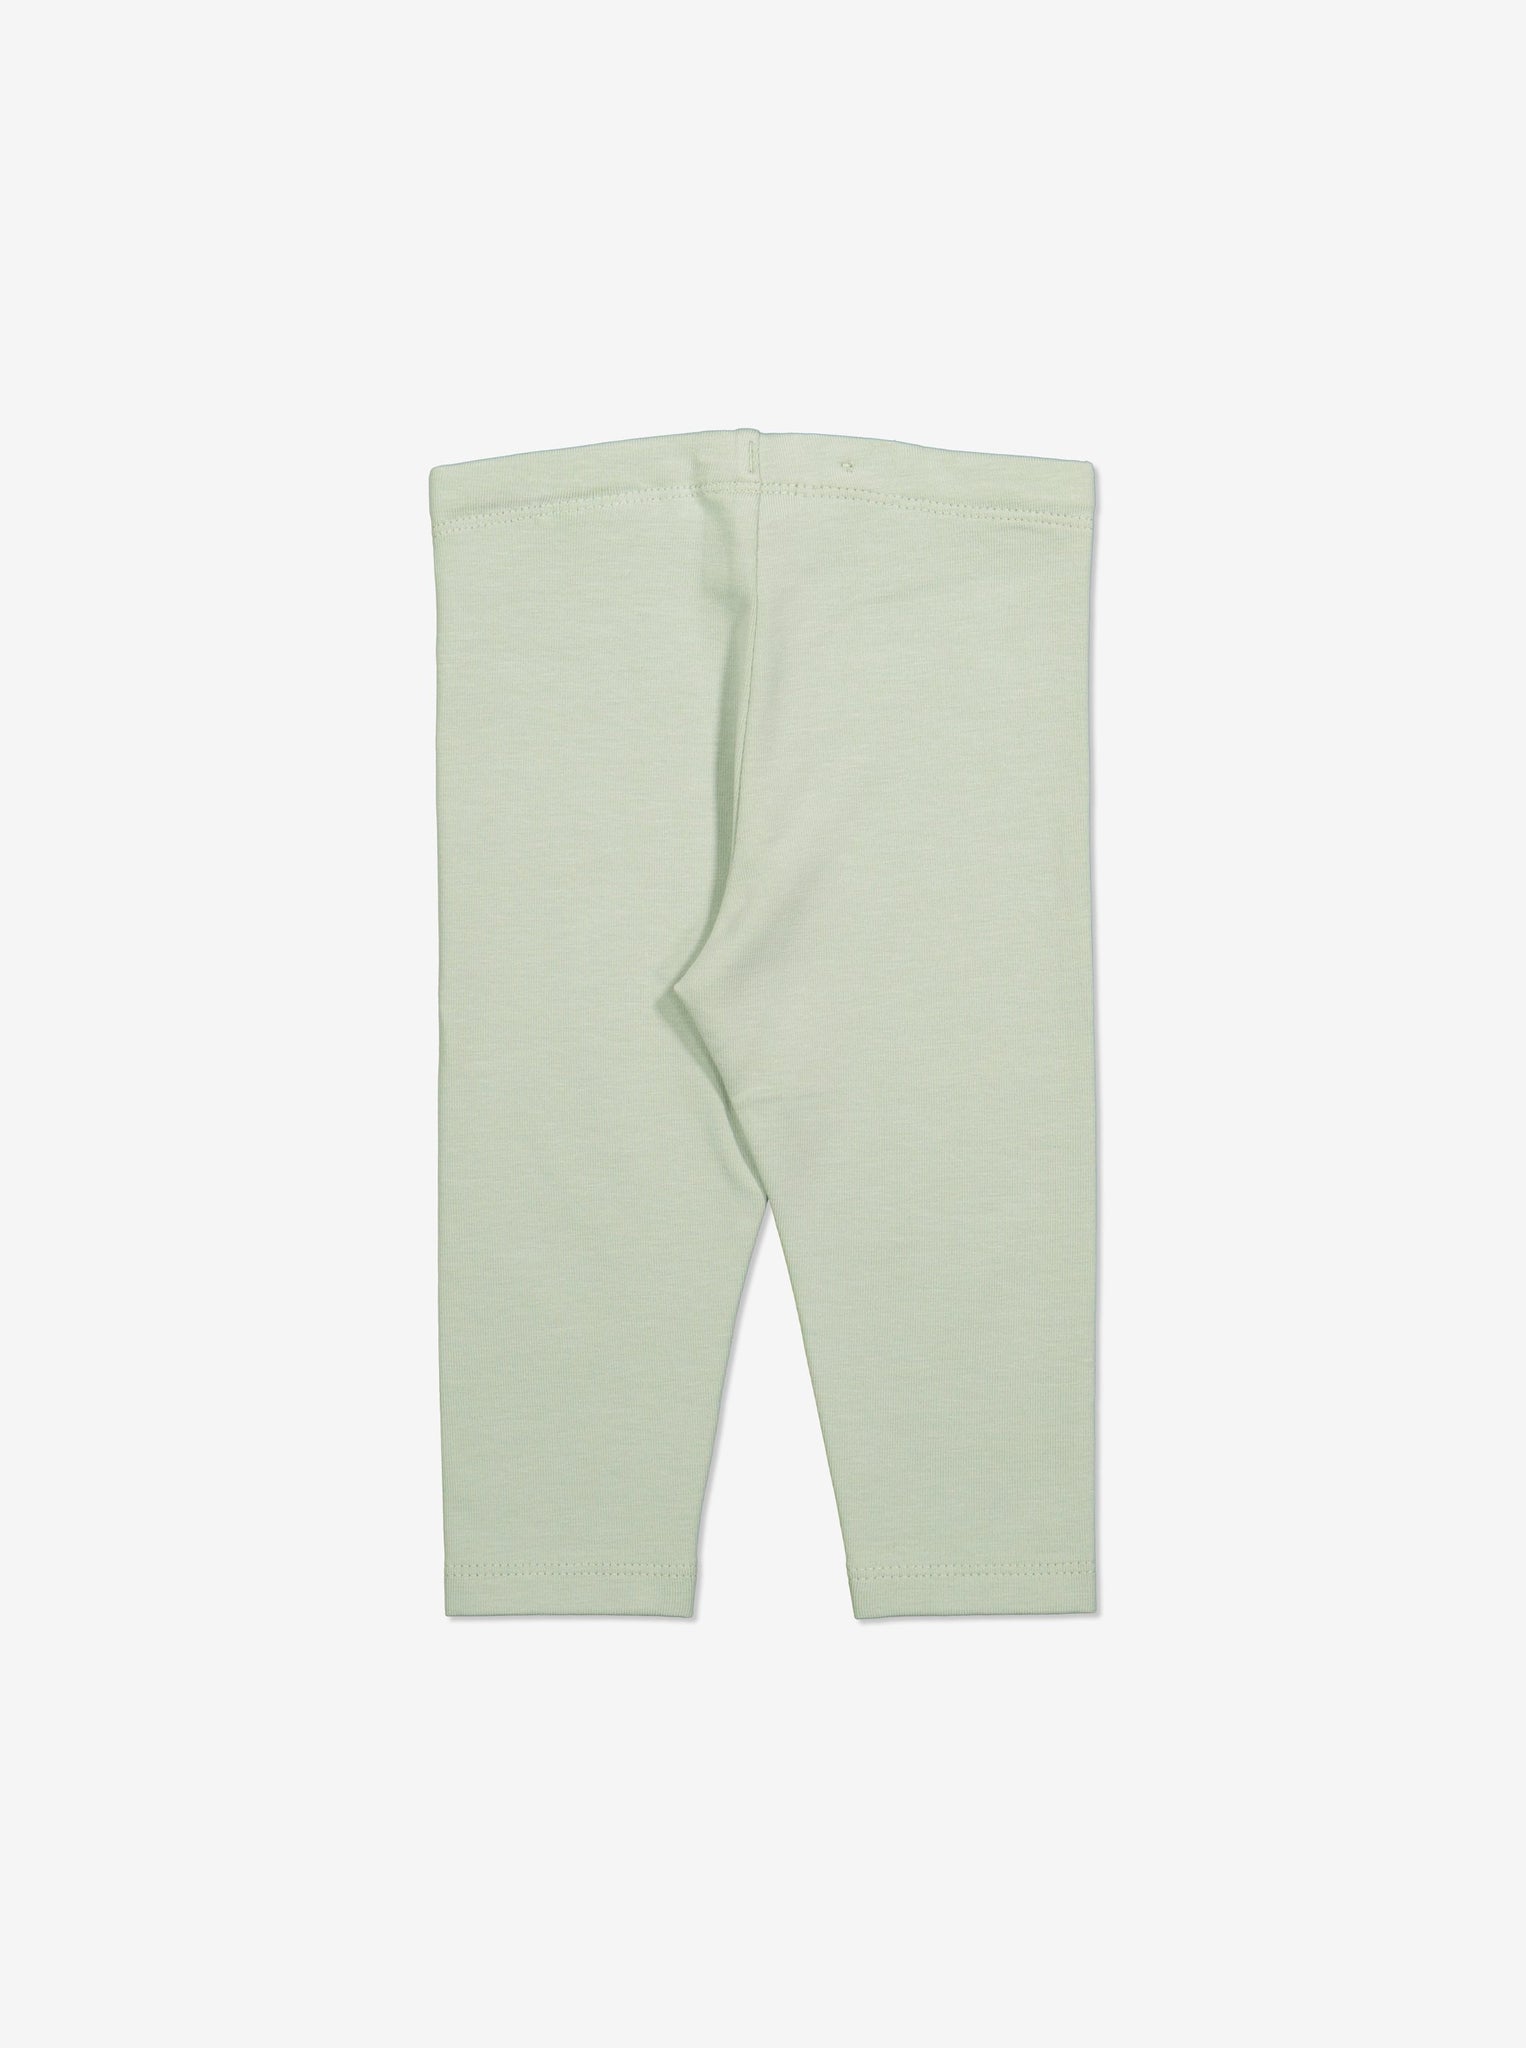  Organic Cotton Green Baby Leggings from Polarn O. Pyret Kidswear. Made from ethically sourced materials.